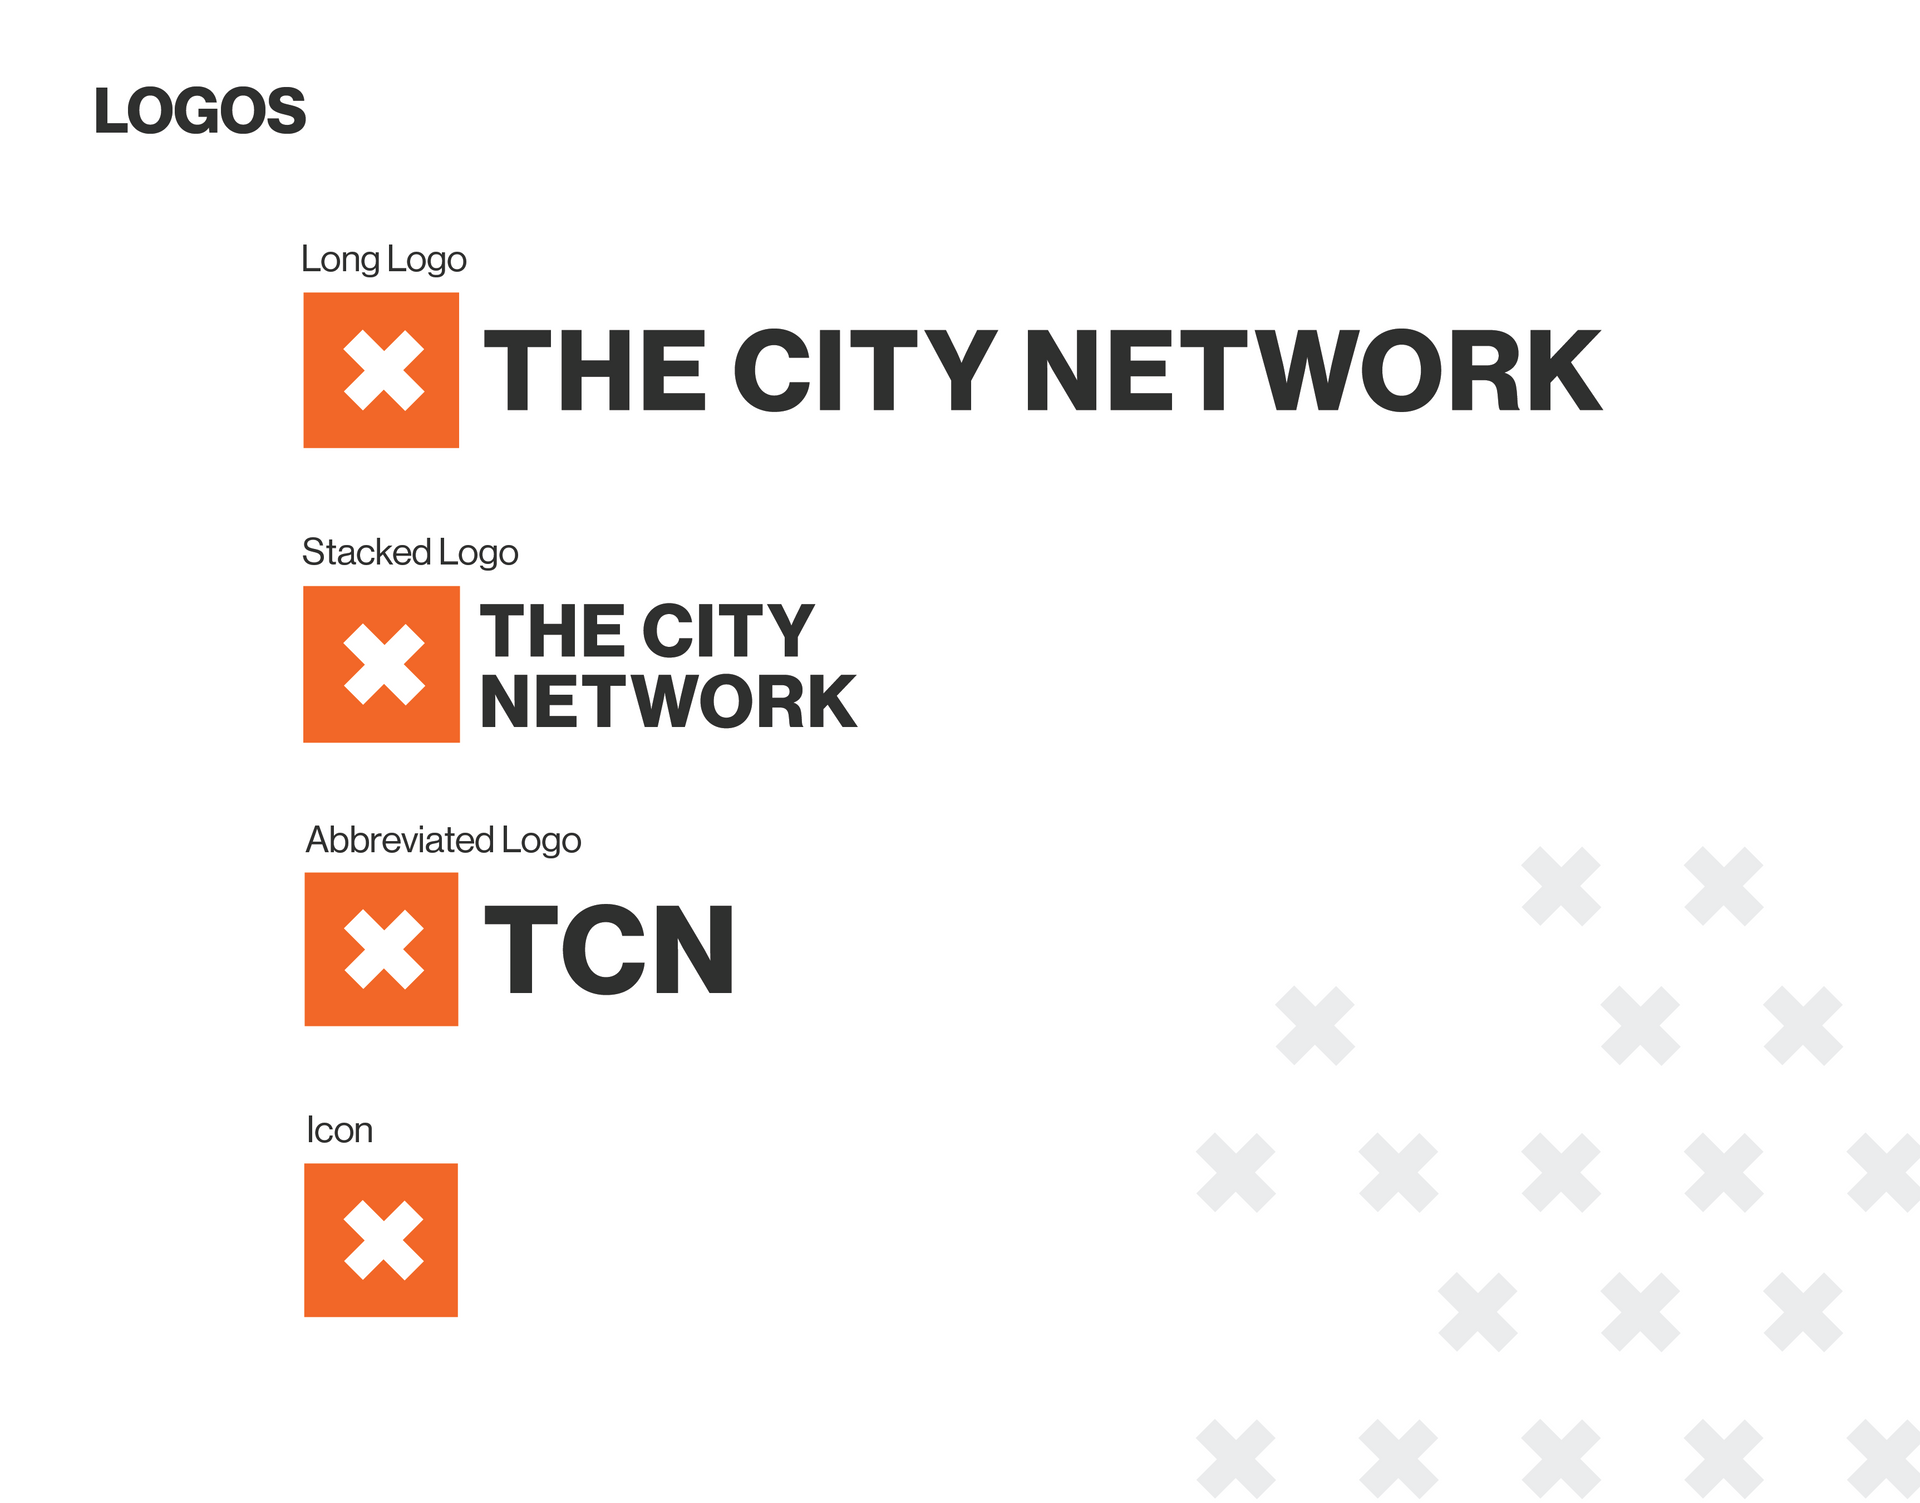 Three logos for the city network are shown on a white background.